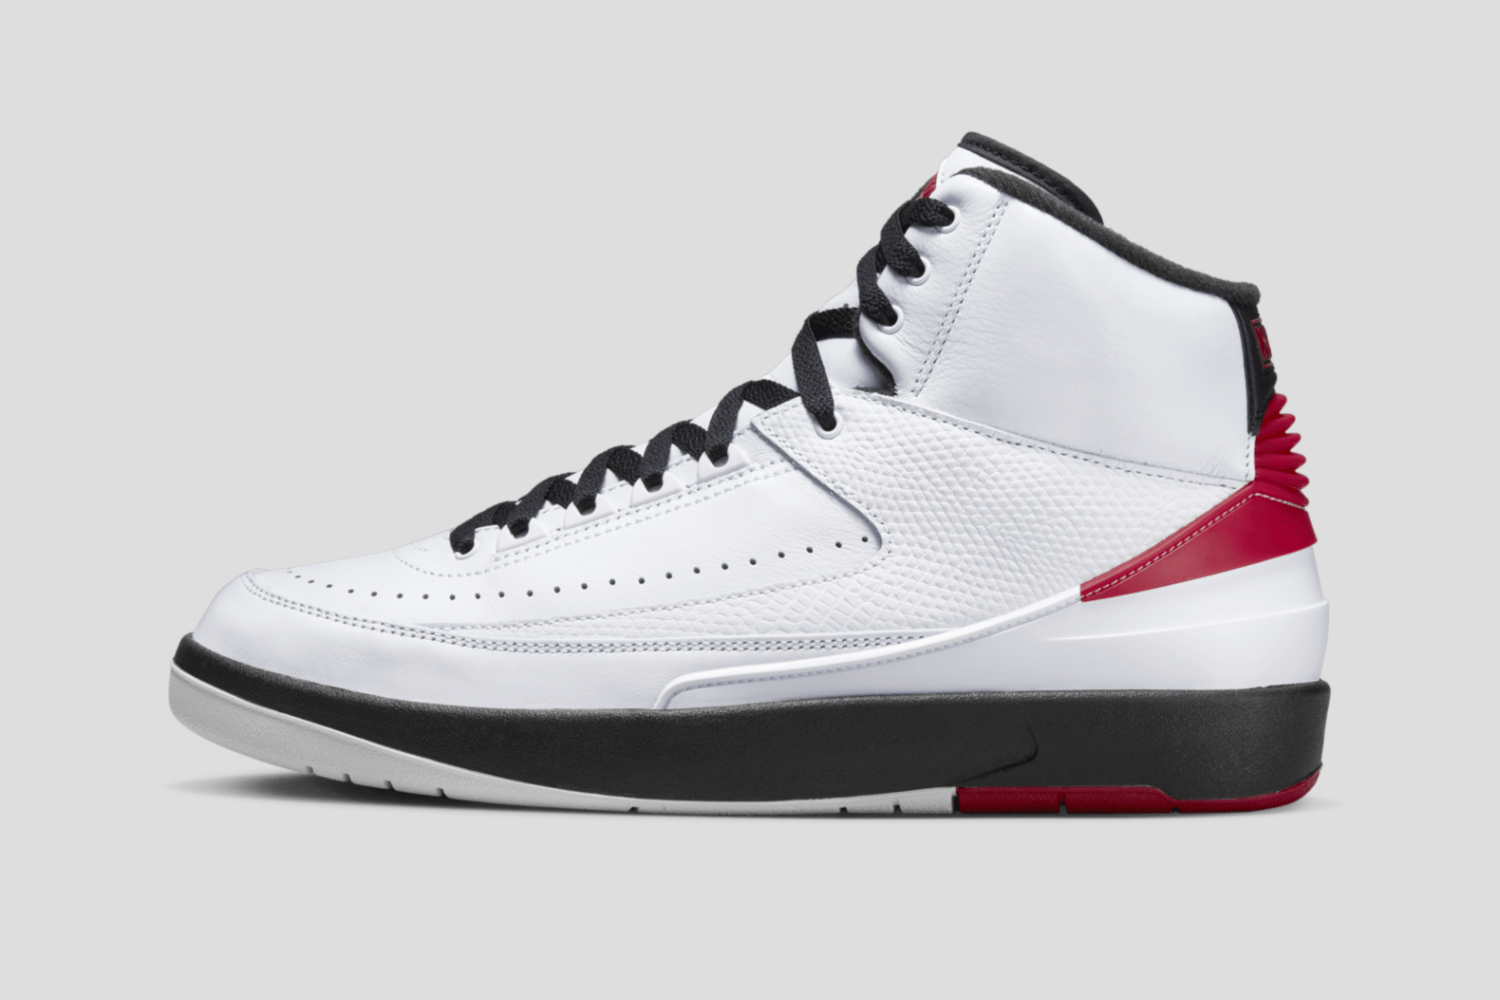 The Air Jordan 2 'Chicago' will be dropping soon